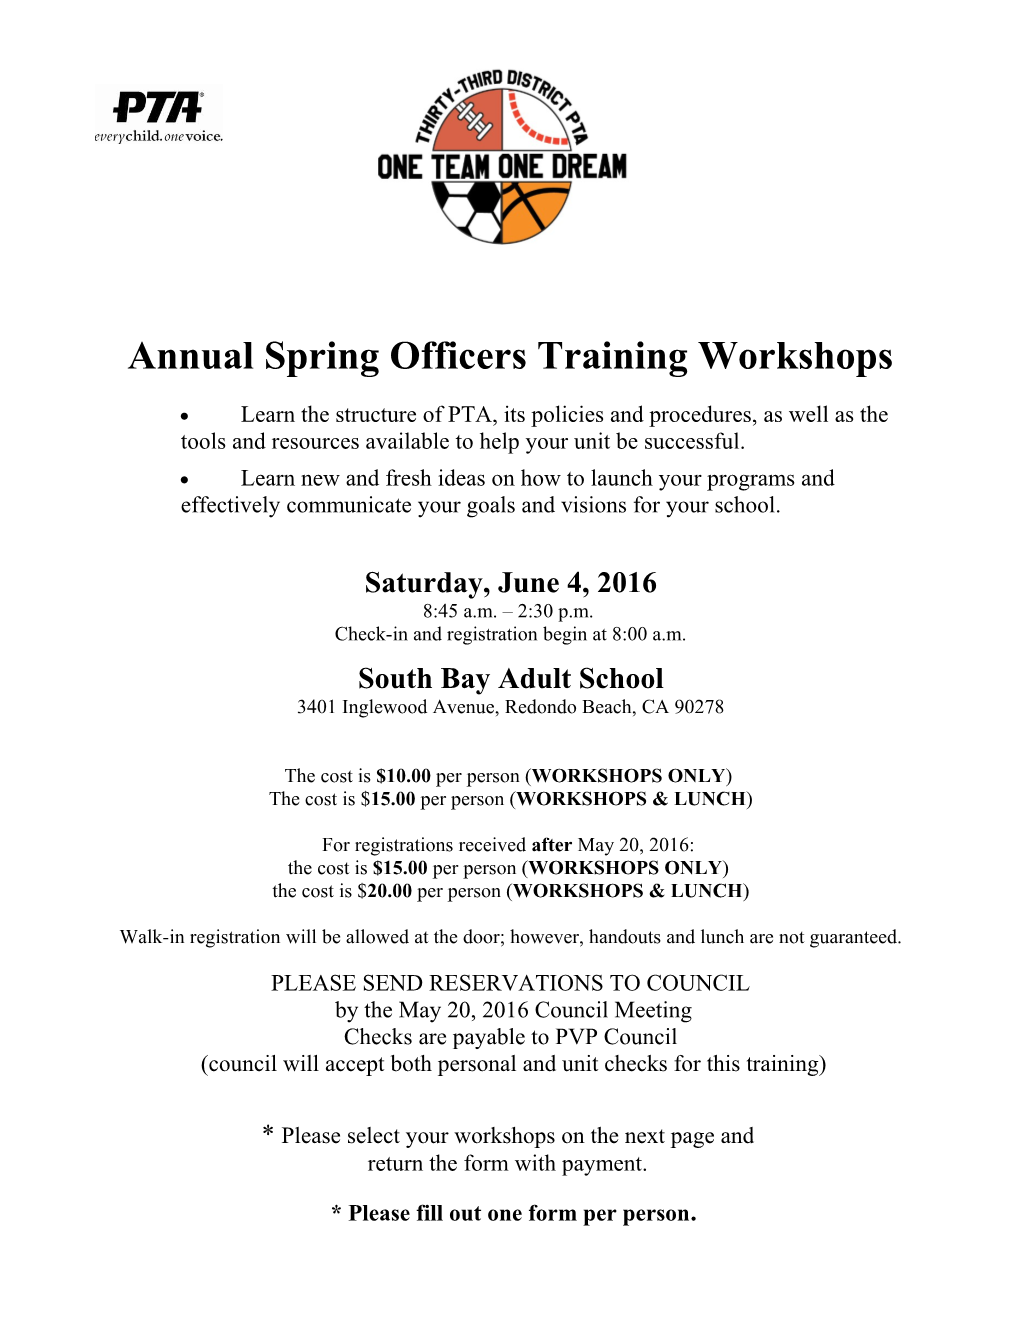 Annual Spring Officers Training Workshops